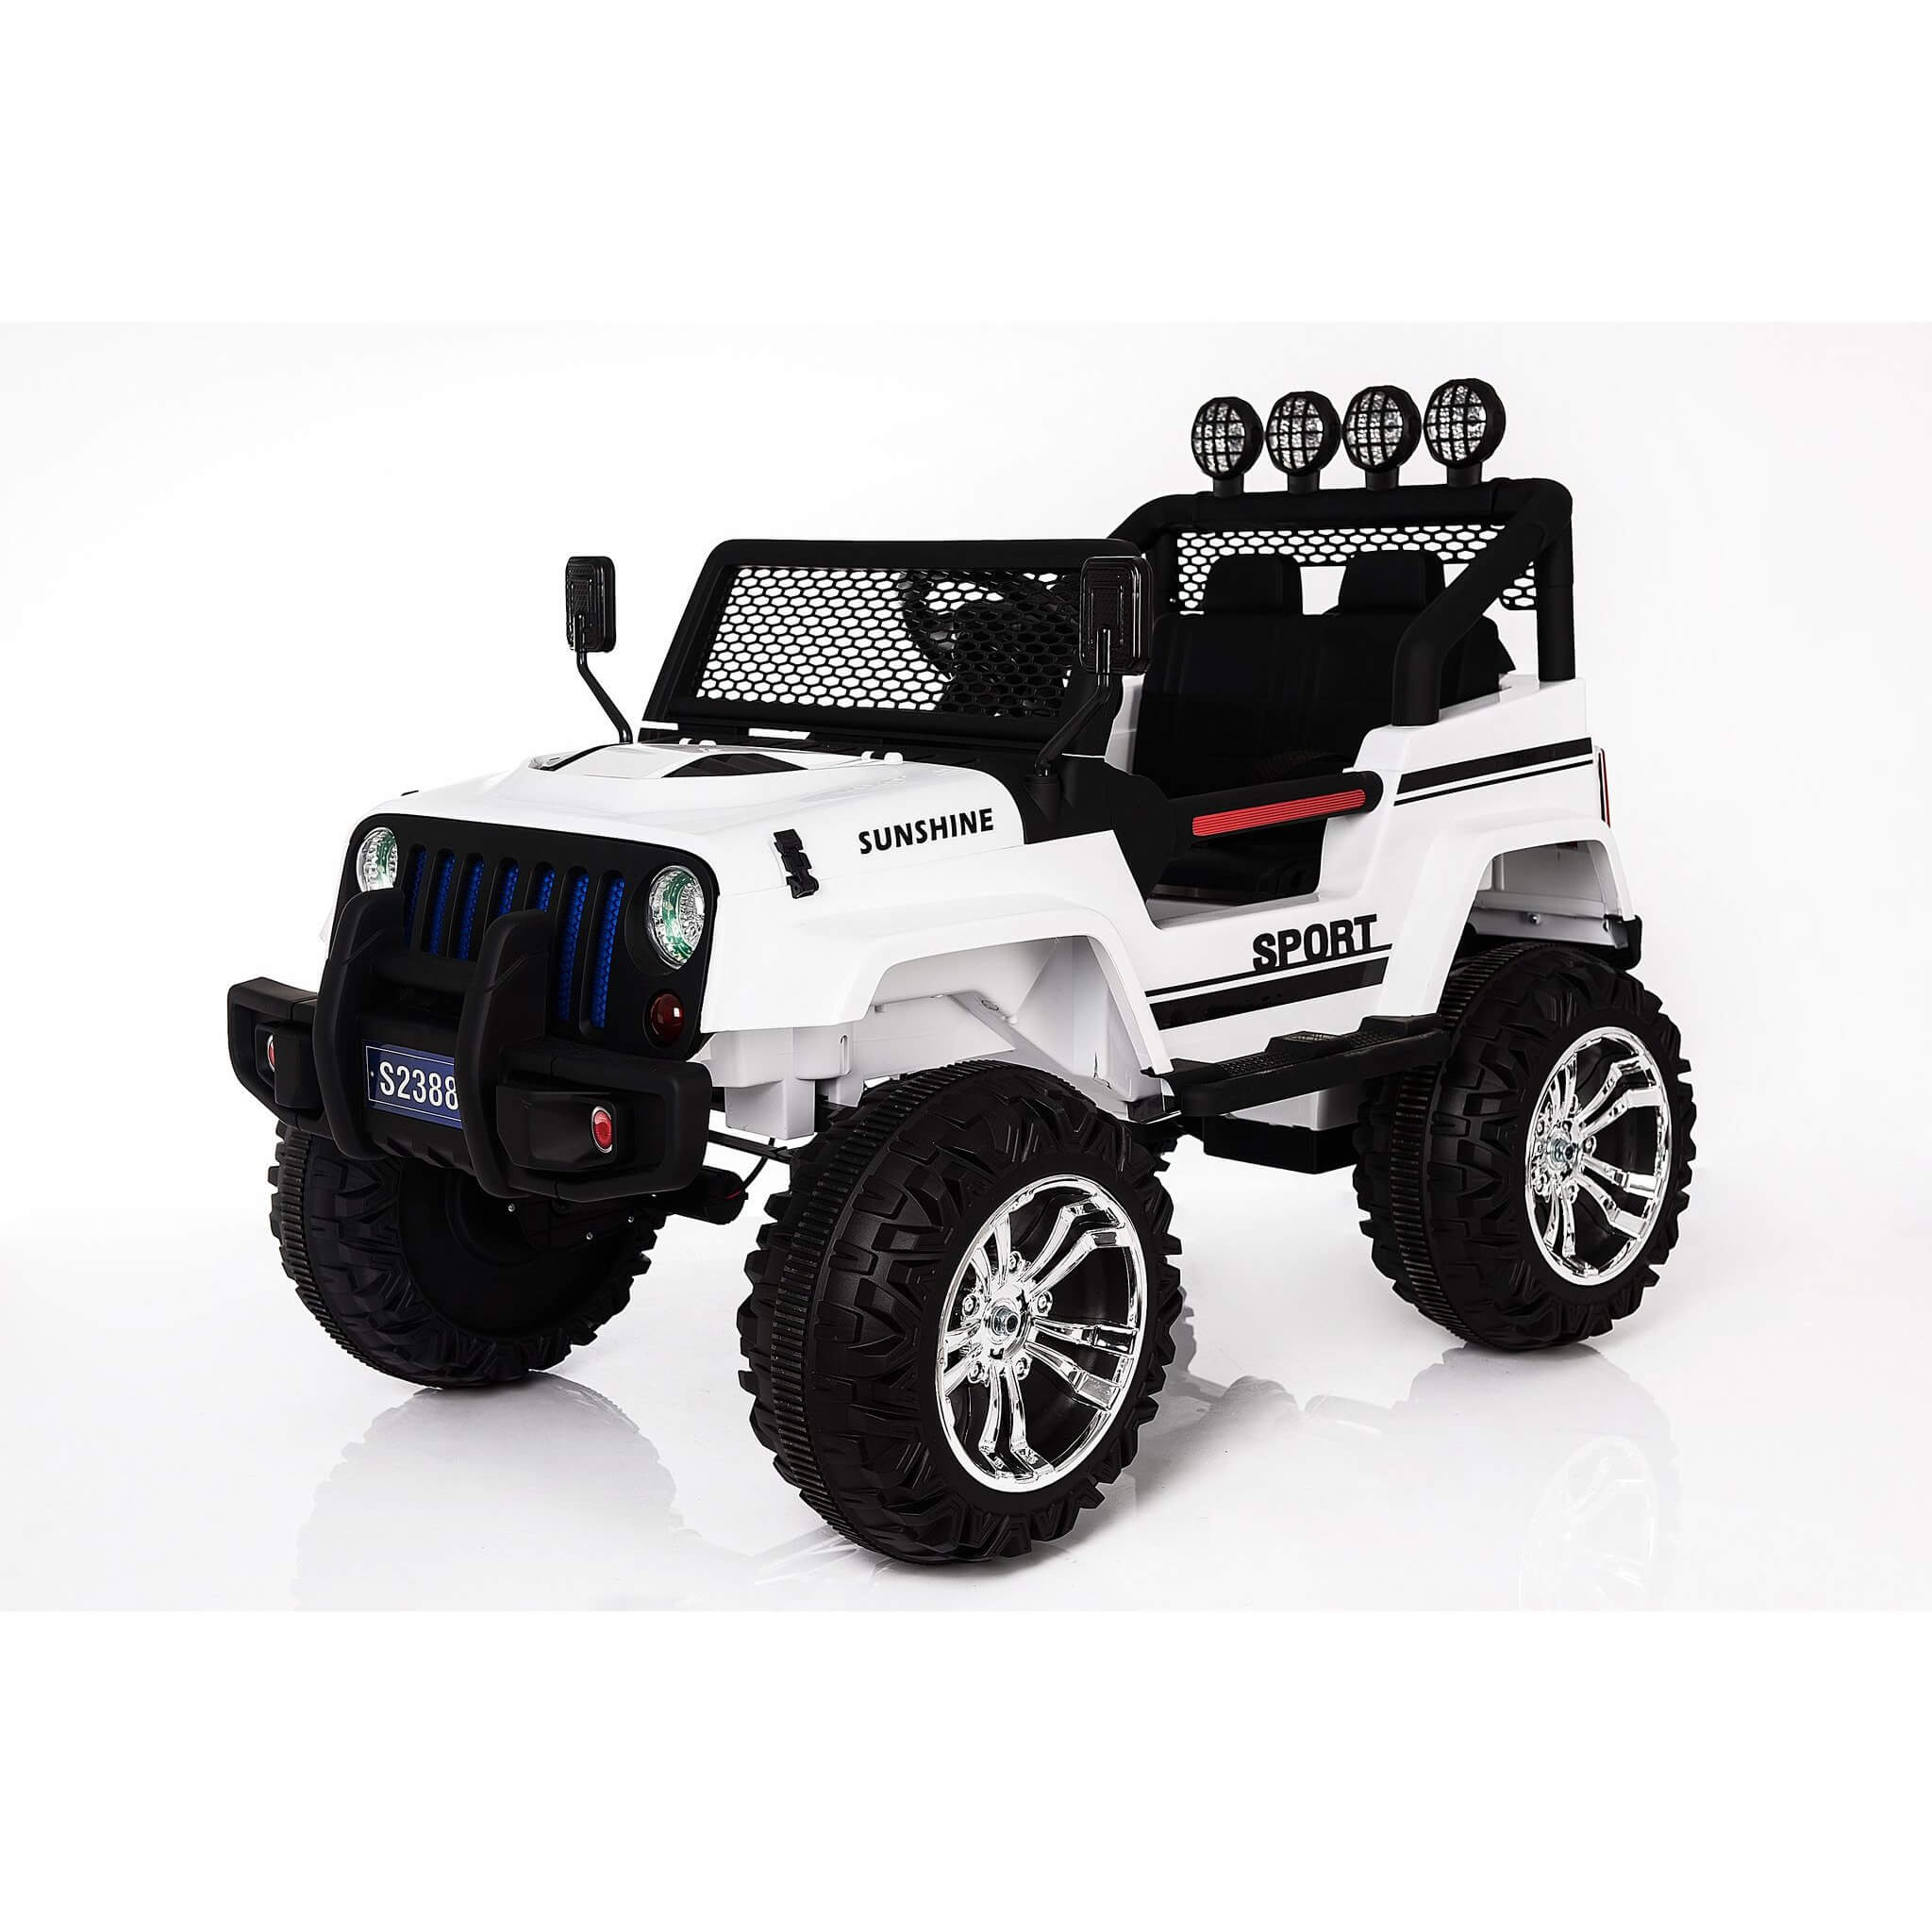 White Ride on SUV Wrangler Style 2-Seats Jeep For kids 12V